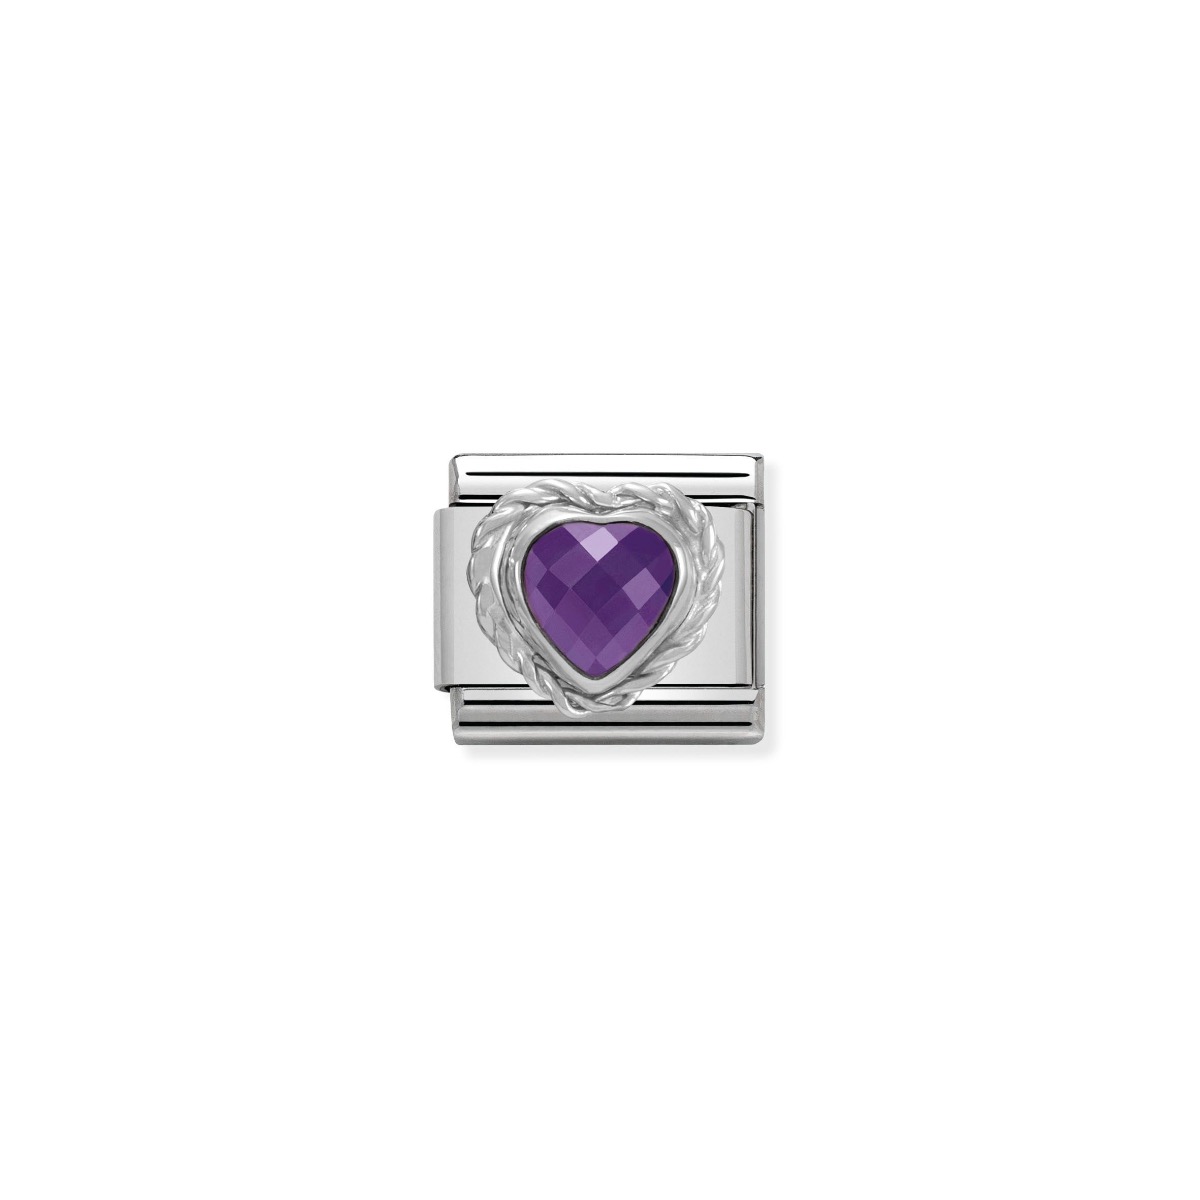 Nomination Silver and Zirconia Classic Faceted Heart Charm - Purple - 330603/001